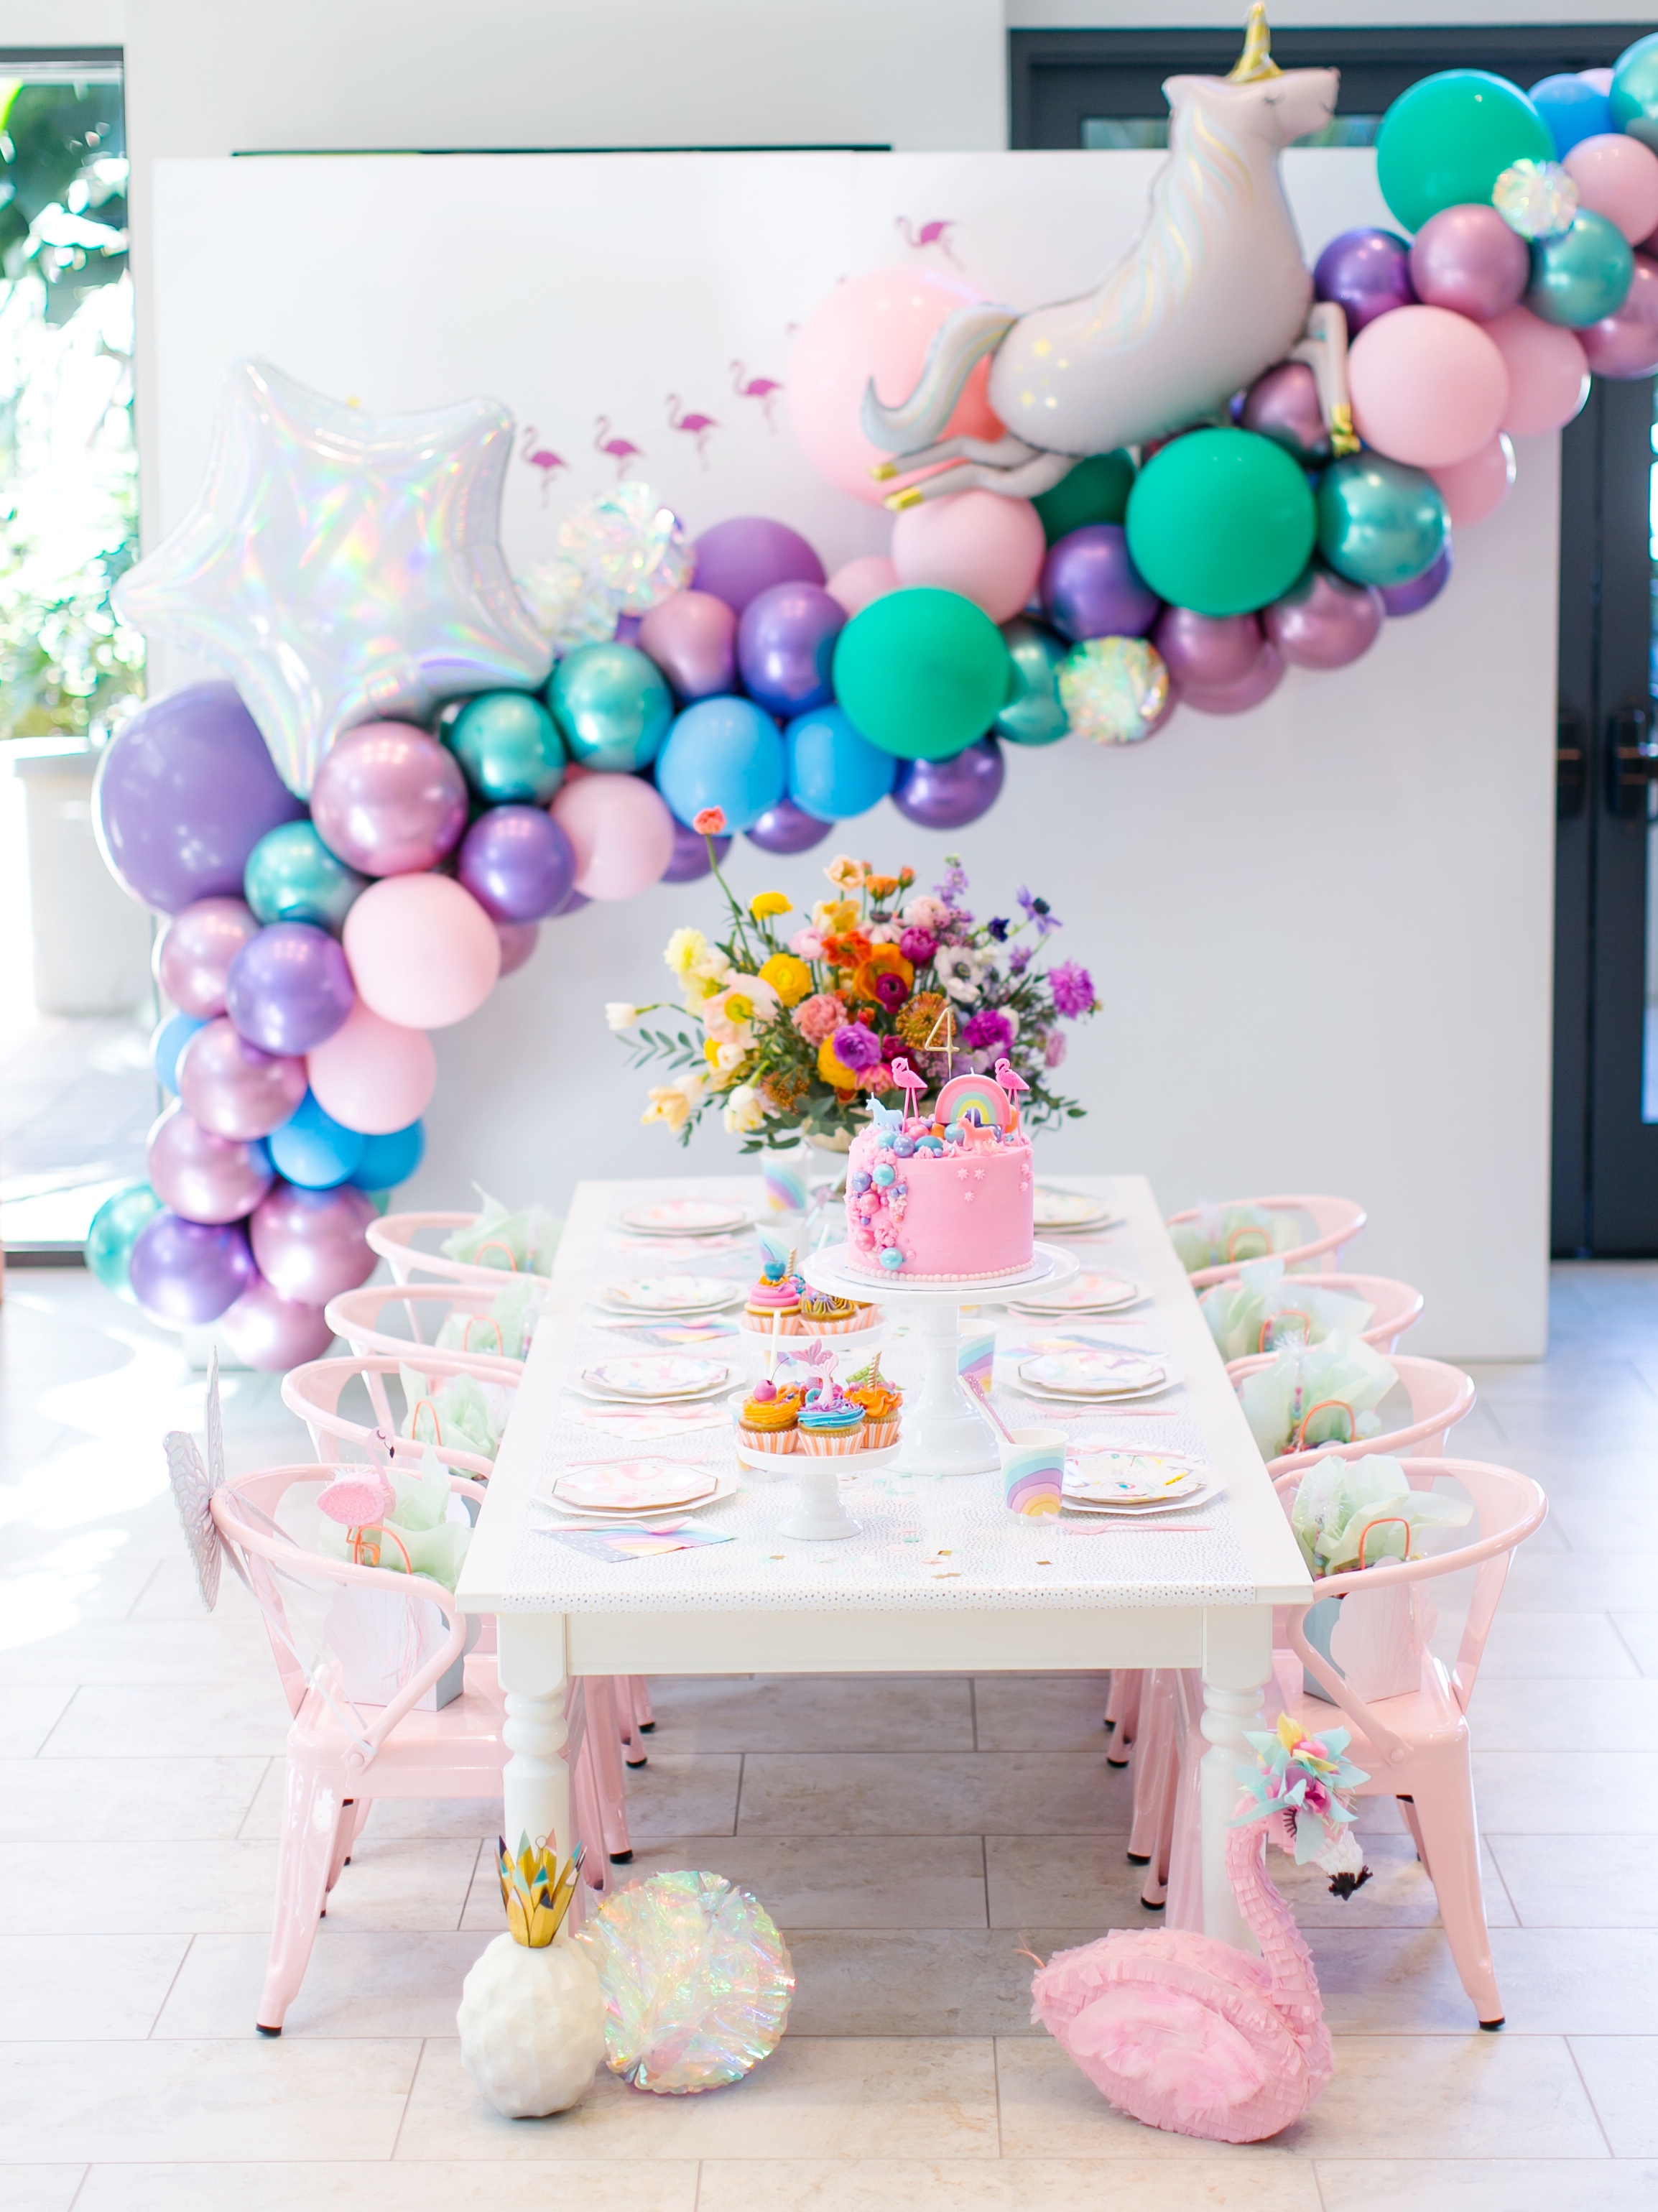 The Most AMAZING Magical Rainbow Birthday Party Ever!